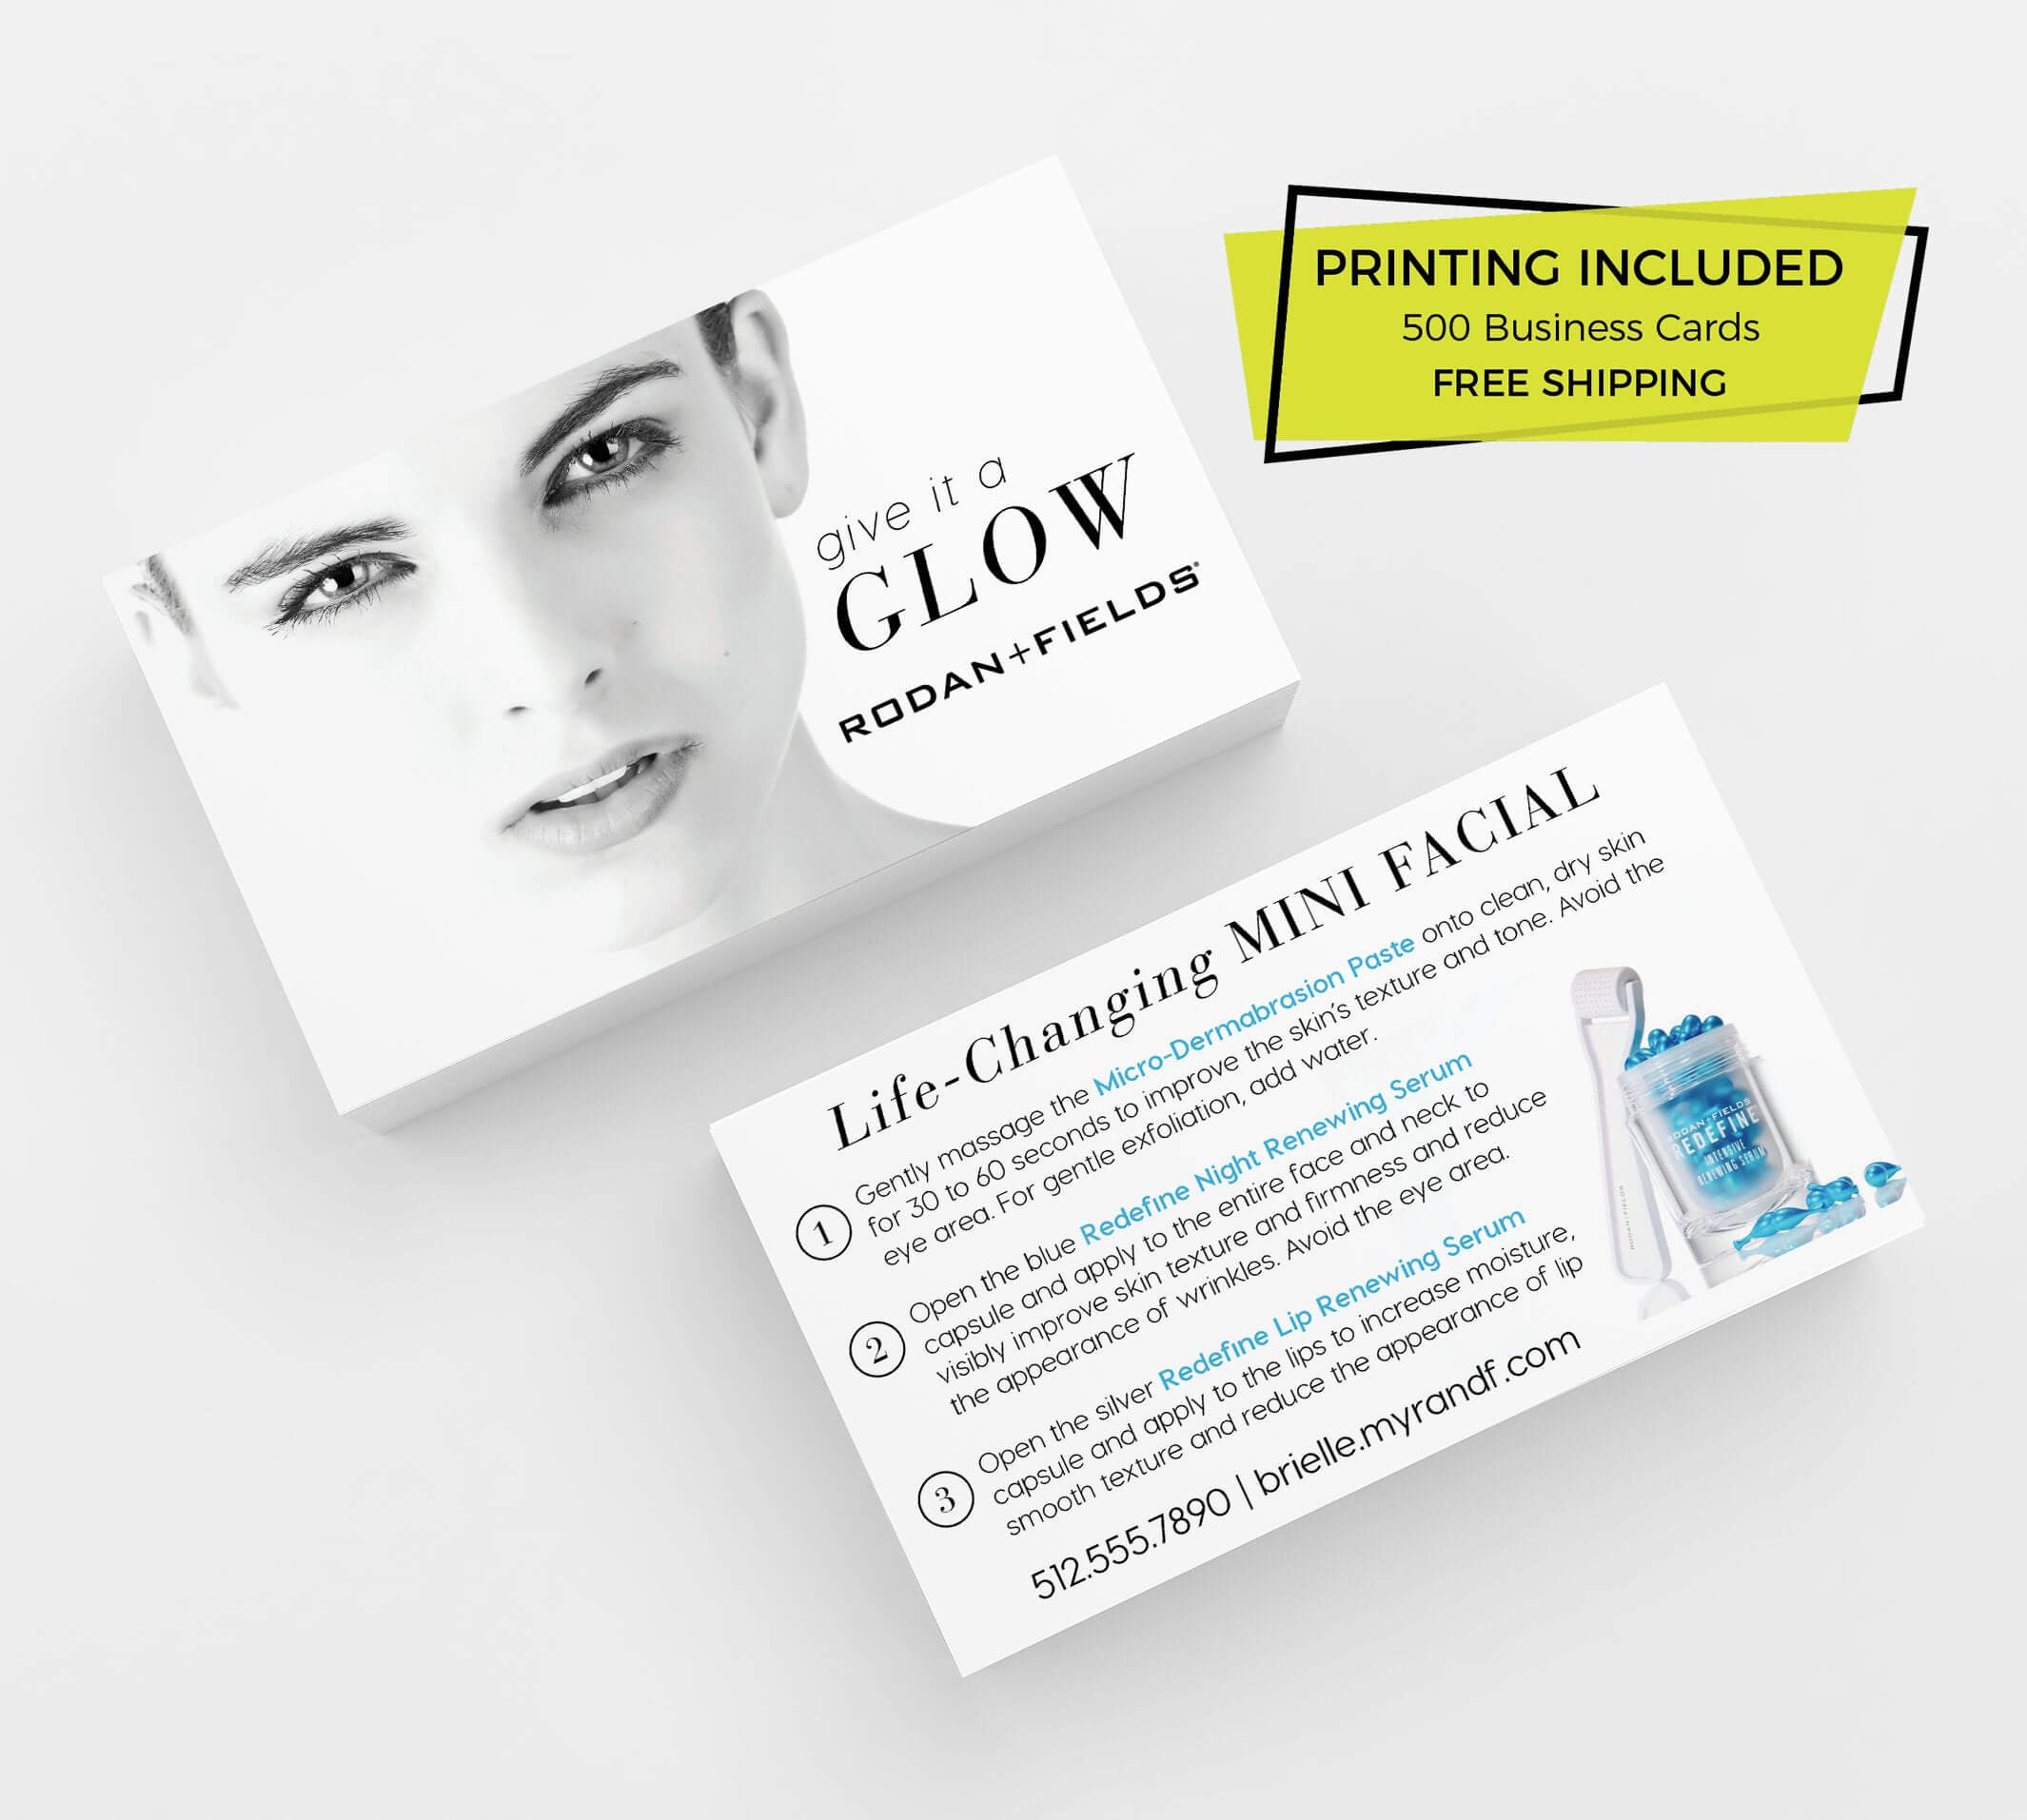 Rodan & Fields Mini Facial Cards Printed 500 Business Cards Template  Personalized Skincare R+F Consultant Redefine Sample Give It A Glow In Rodan And Fields Business Card Template